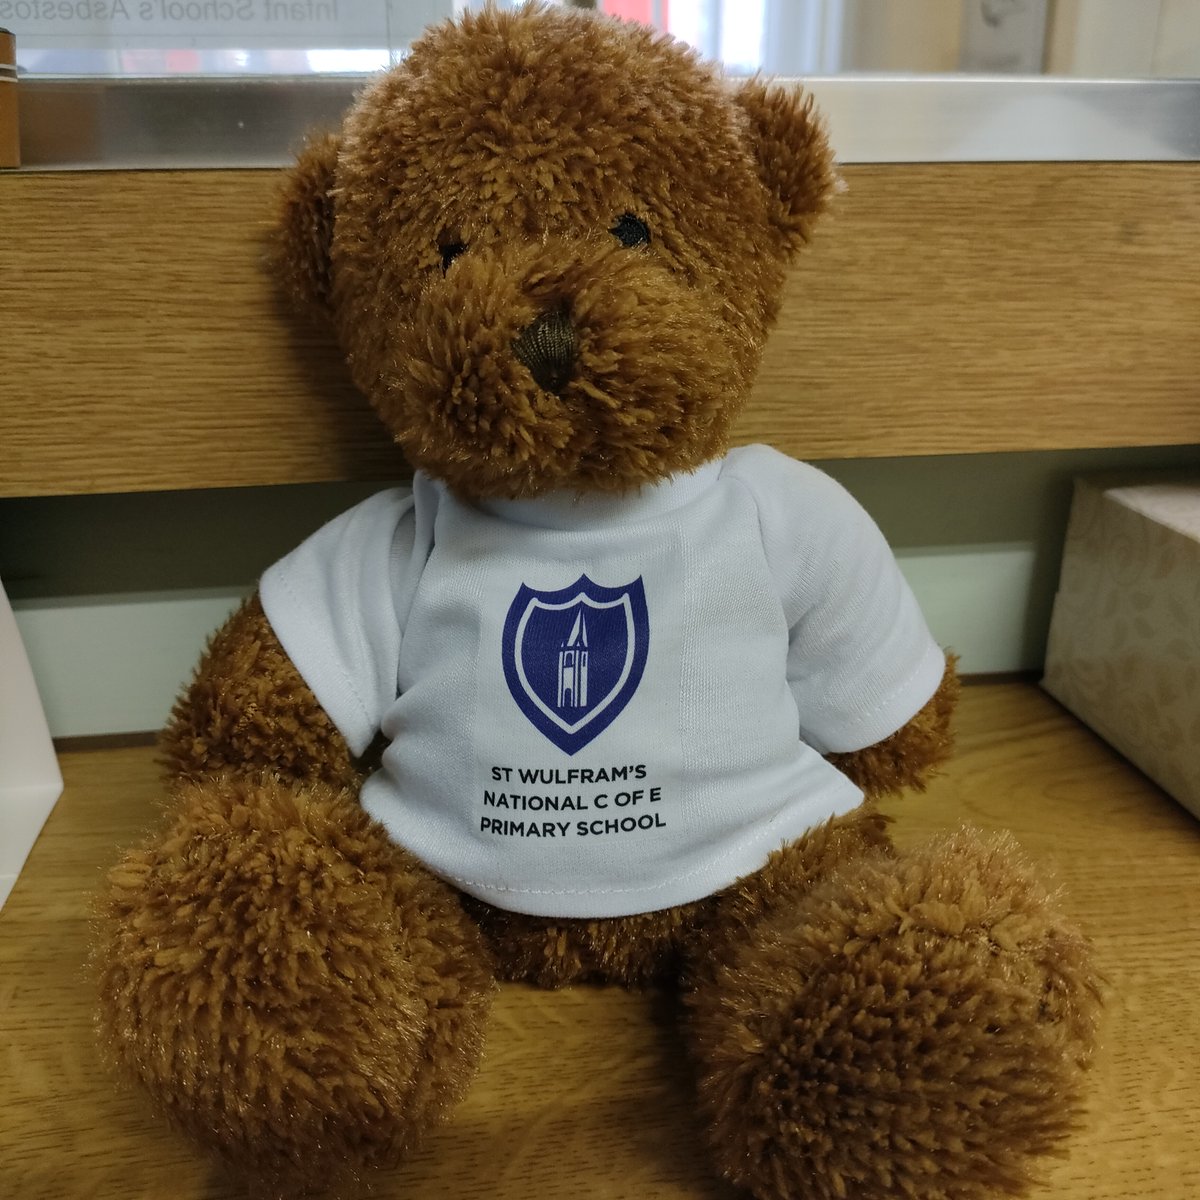 We are looking for homes for our school teddies! Come along to our Open Eve tomorrow 6 - 7pm and pick up your teddy. What will you name yours? nationaljunior.co.uk